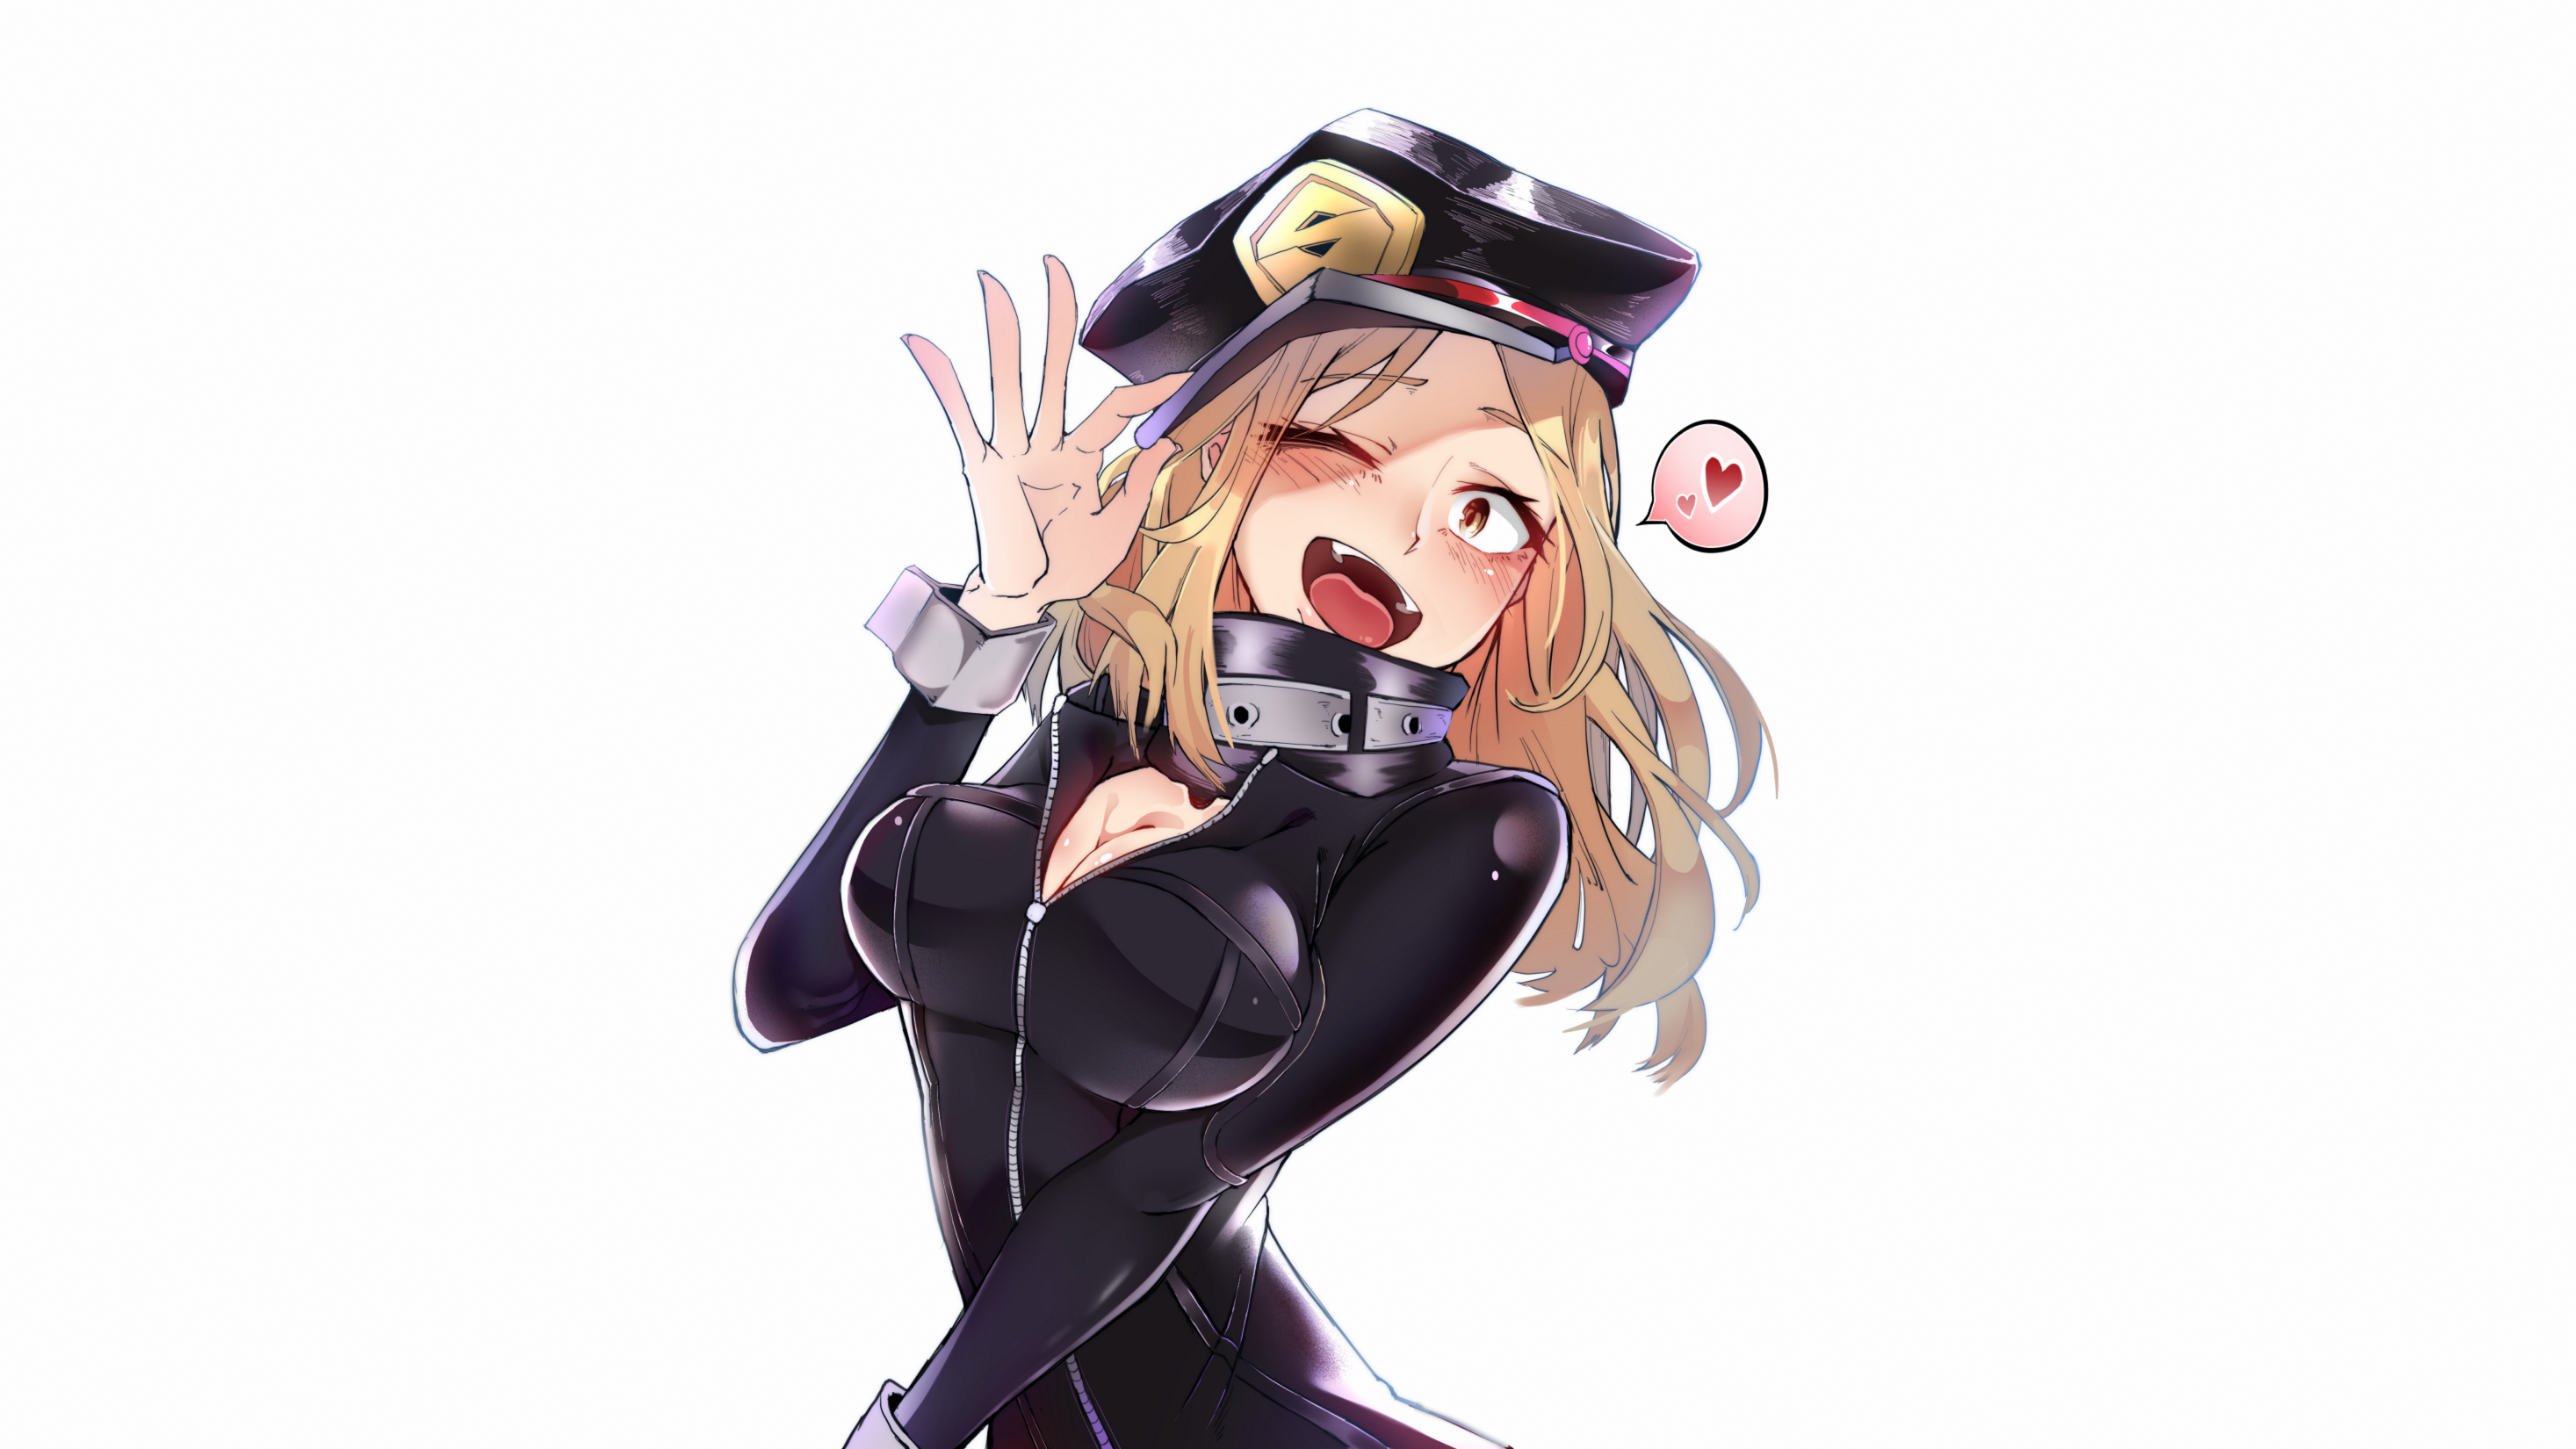 Anime 2933x1650 Utsushimi Camie Boku no Hero Academia anime anime girls blonde berets looking at viewer wink happy open mouth blushing cleavage catsuit heart (design) portrait white background simple background artwork drawing 2D digital art illustration fan art Kidmukuro speech bubble hat arched back unzipped